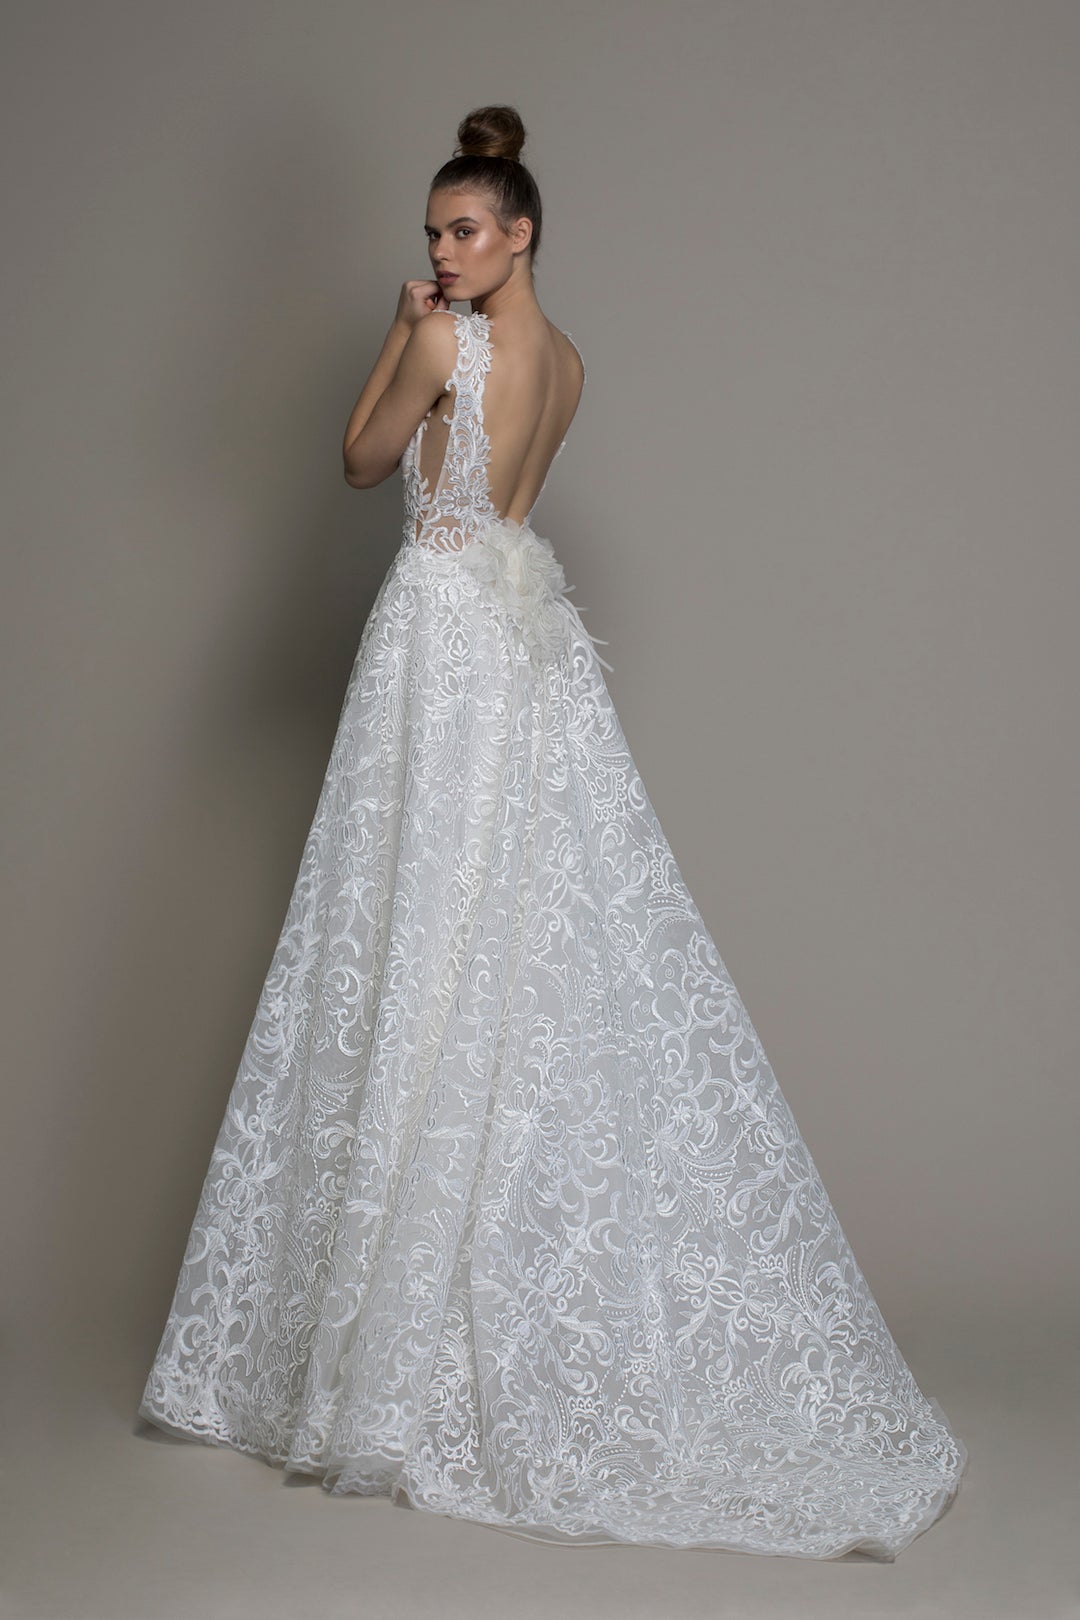 Pnina Tornai's new LOVE 2020 Collection is out! This is style 14780